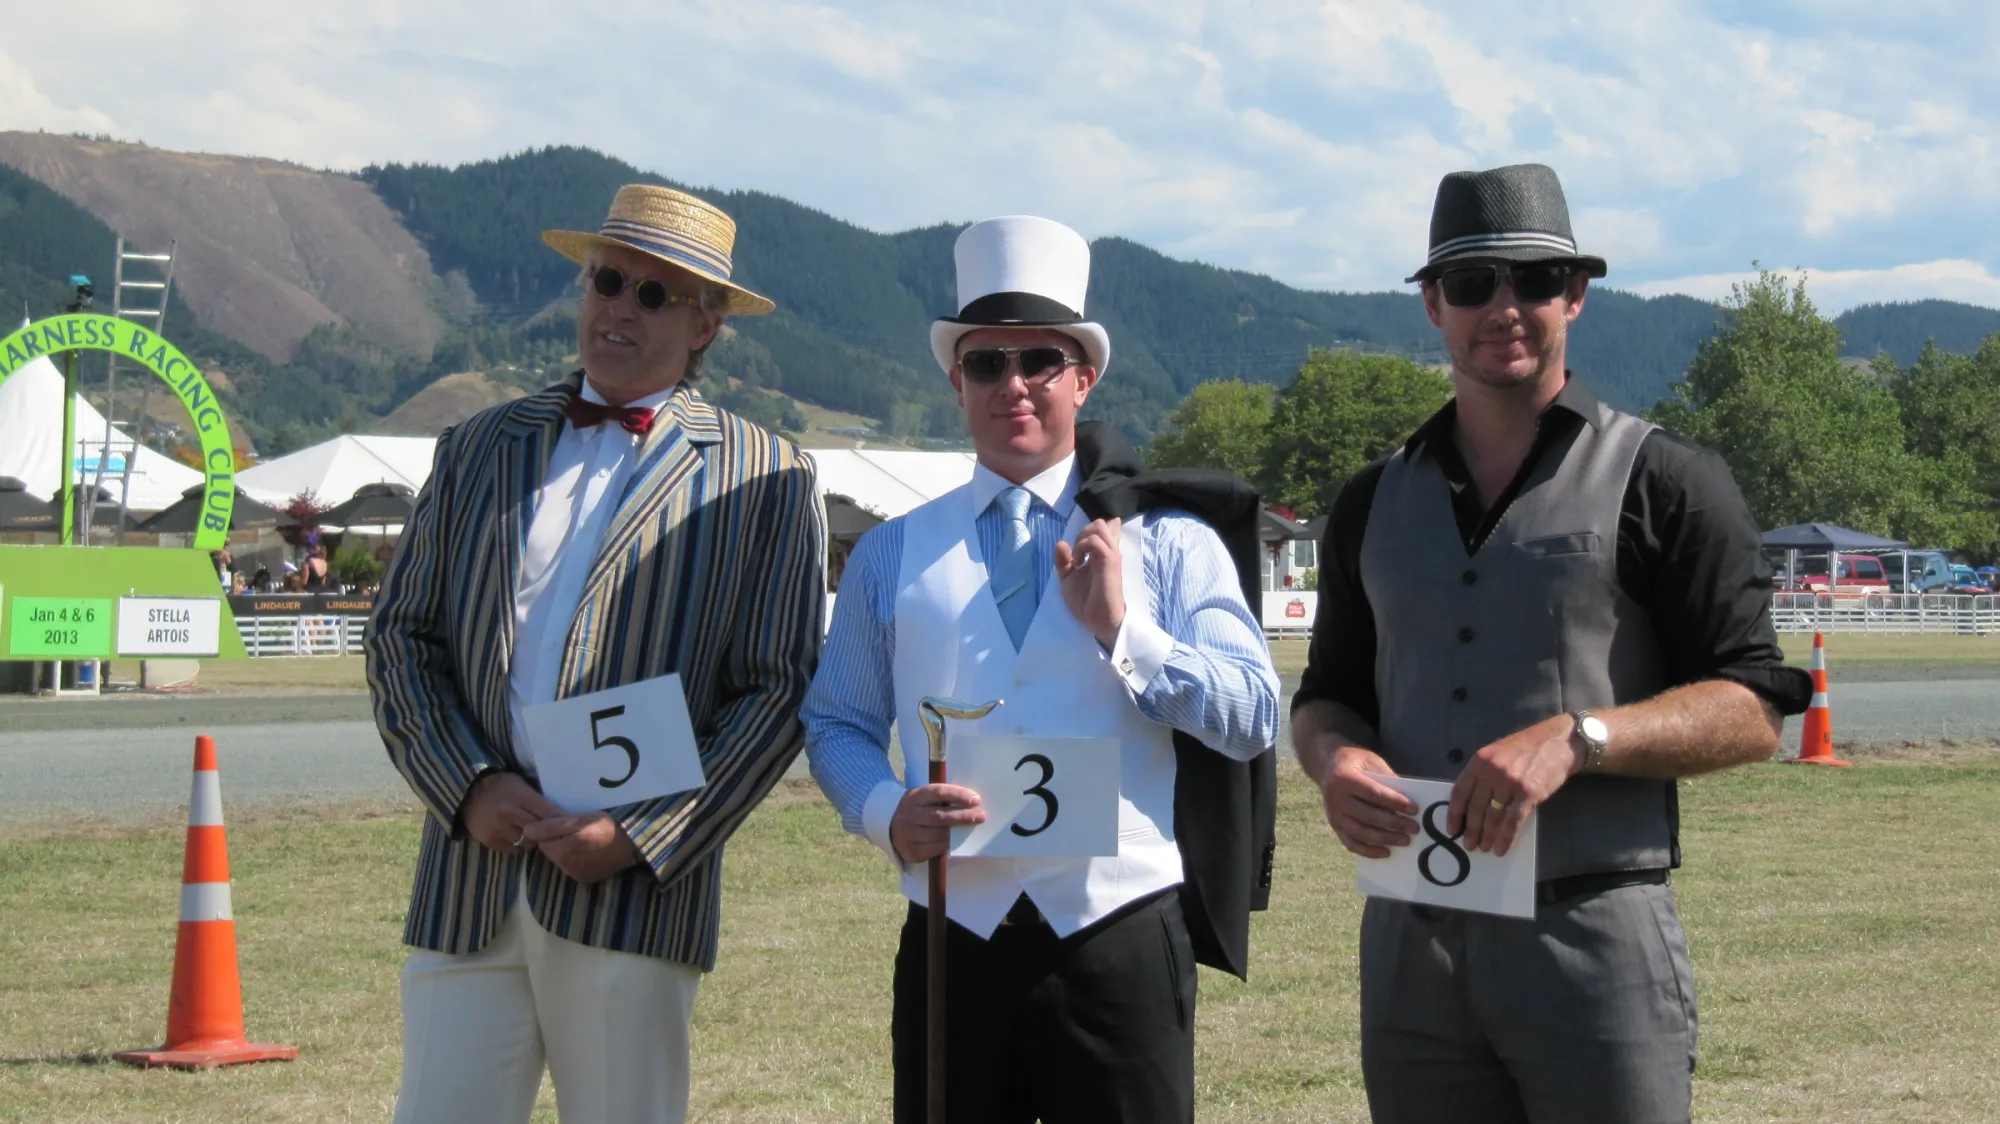 Fashion in the field at the Nelson Harness Races in January